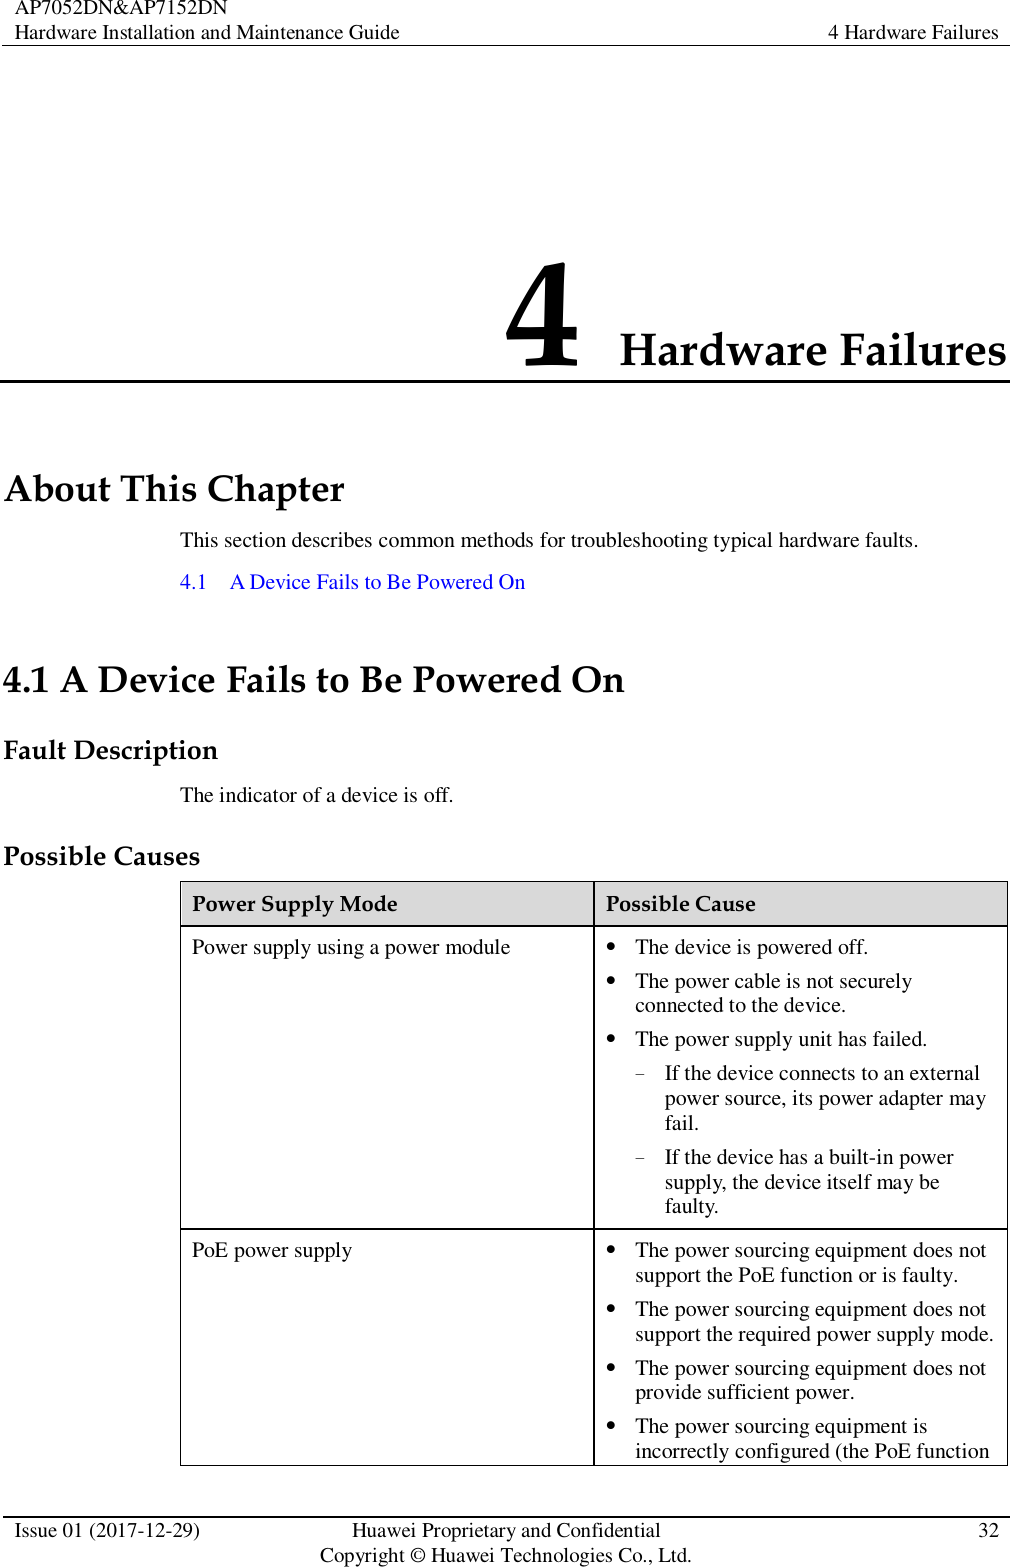 AP7052DN&amp;AP7152DN Hardware Installation and Maintenance Guide 4 Hardware Failures  Issue 01 (2017-12-29) Huawei Proprietary and Confidential                                     Copyright © Huawei Technologies Co., Ltd. 32  4 Hardware Failures About This Chapter This section describes common methods for troubleshooting typical hardware faults. 4.1    A Device Fails to Be Powered On 4.1 A Device Fails to Be Powered On Fault Description The indicator of a device is off. Possible Causes Power Supply Mode Possible Cause Power supply using a power module  The device is powered off.  The power cable is not securely connected to the device.  The power supply unit has failed. − If the device connects to an external power source, its power adapter may fail. − If the device has a built-in power supply, the device itself may be faulty. PoE power supply  The power sourcing equipment does not support the PoE function or is faulty.  The power sourcing equipment does not support the required power supply mode.  The power sourcing equipment does not provide sufficient power.  The power sourcing equipment is incorrectly configured (the PoE function 